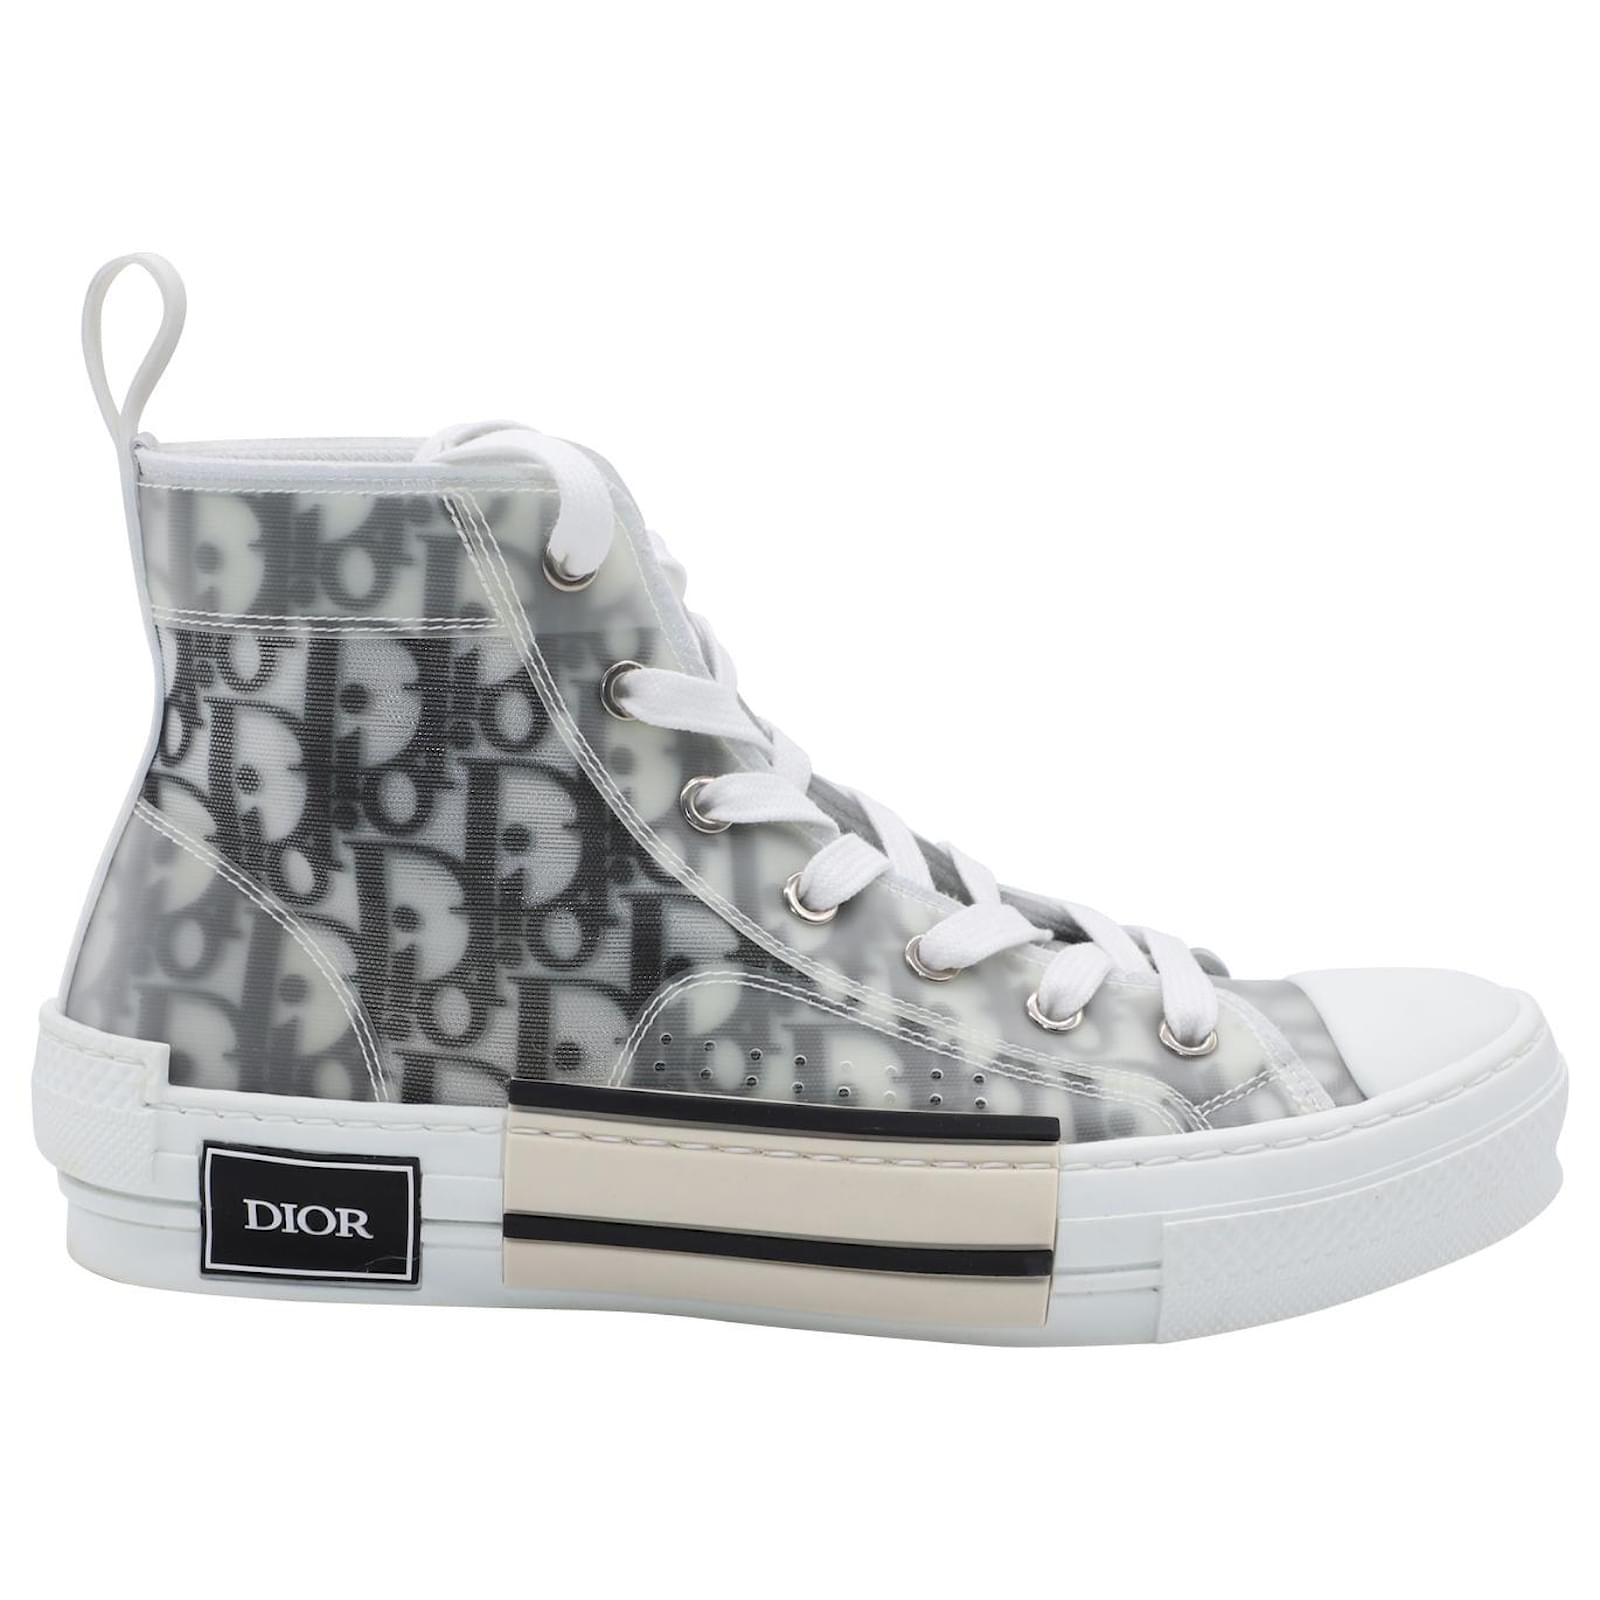 Dior Oblique B23 High Top Sneakers in White Canvas Cloth ref